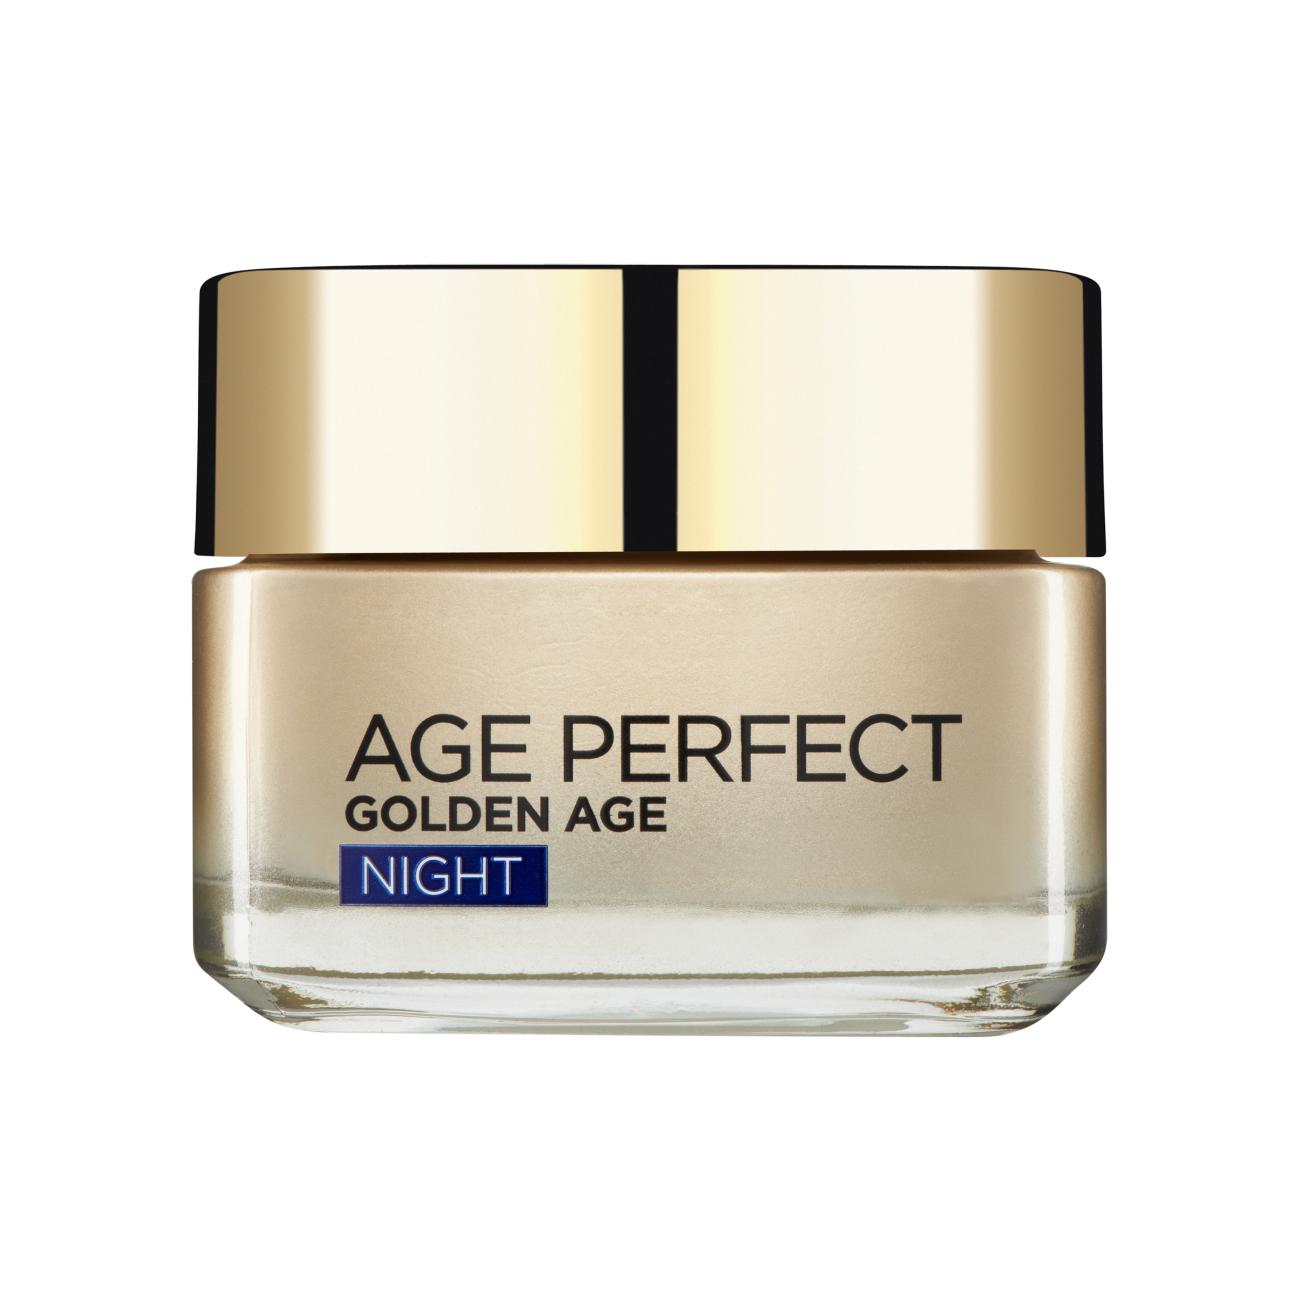 Age Perfect Golden Age Face Care Re-Densifying Night Cream